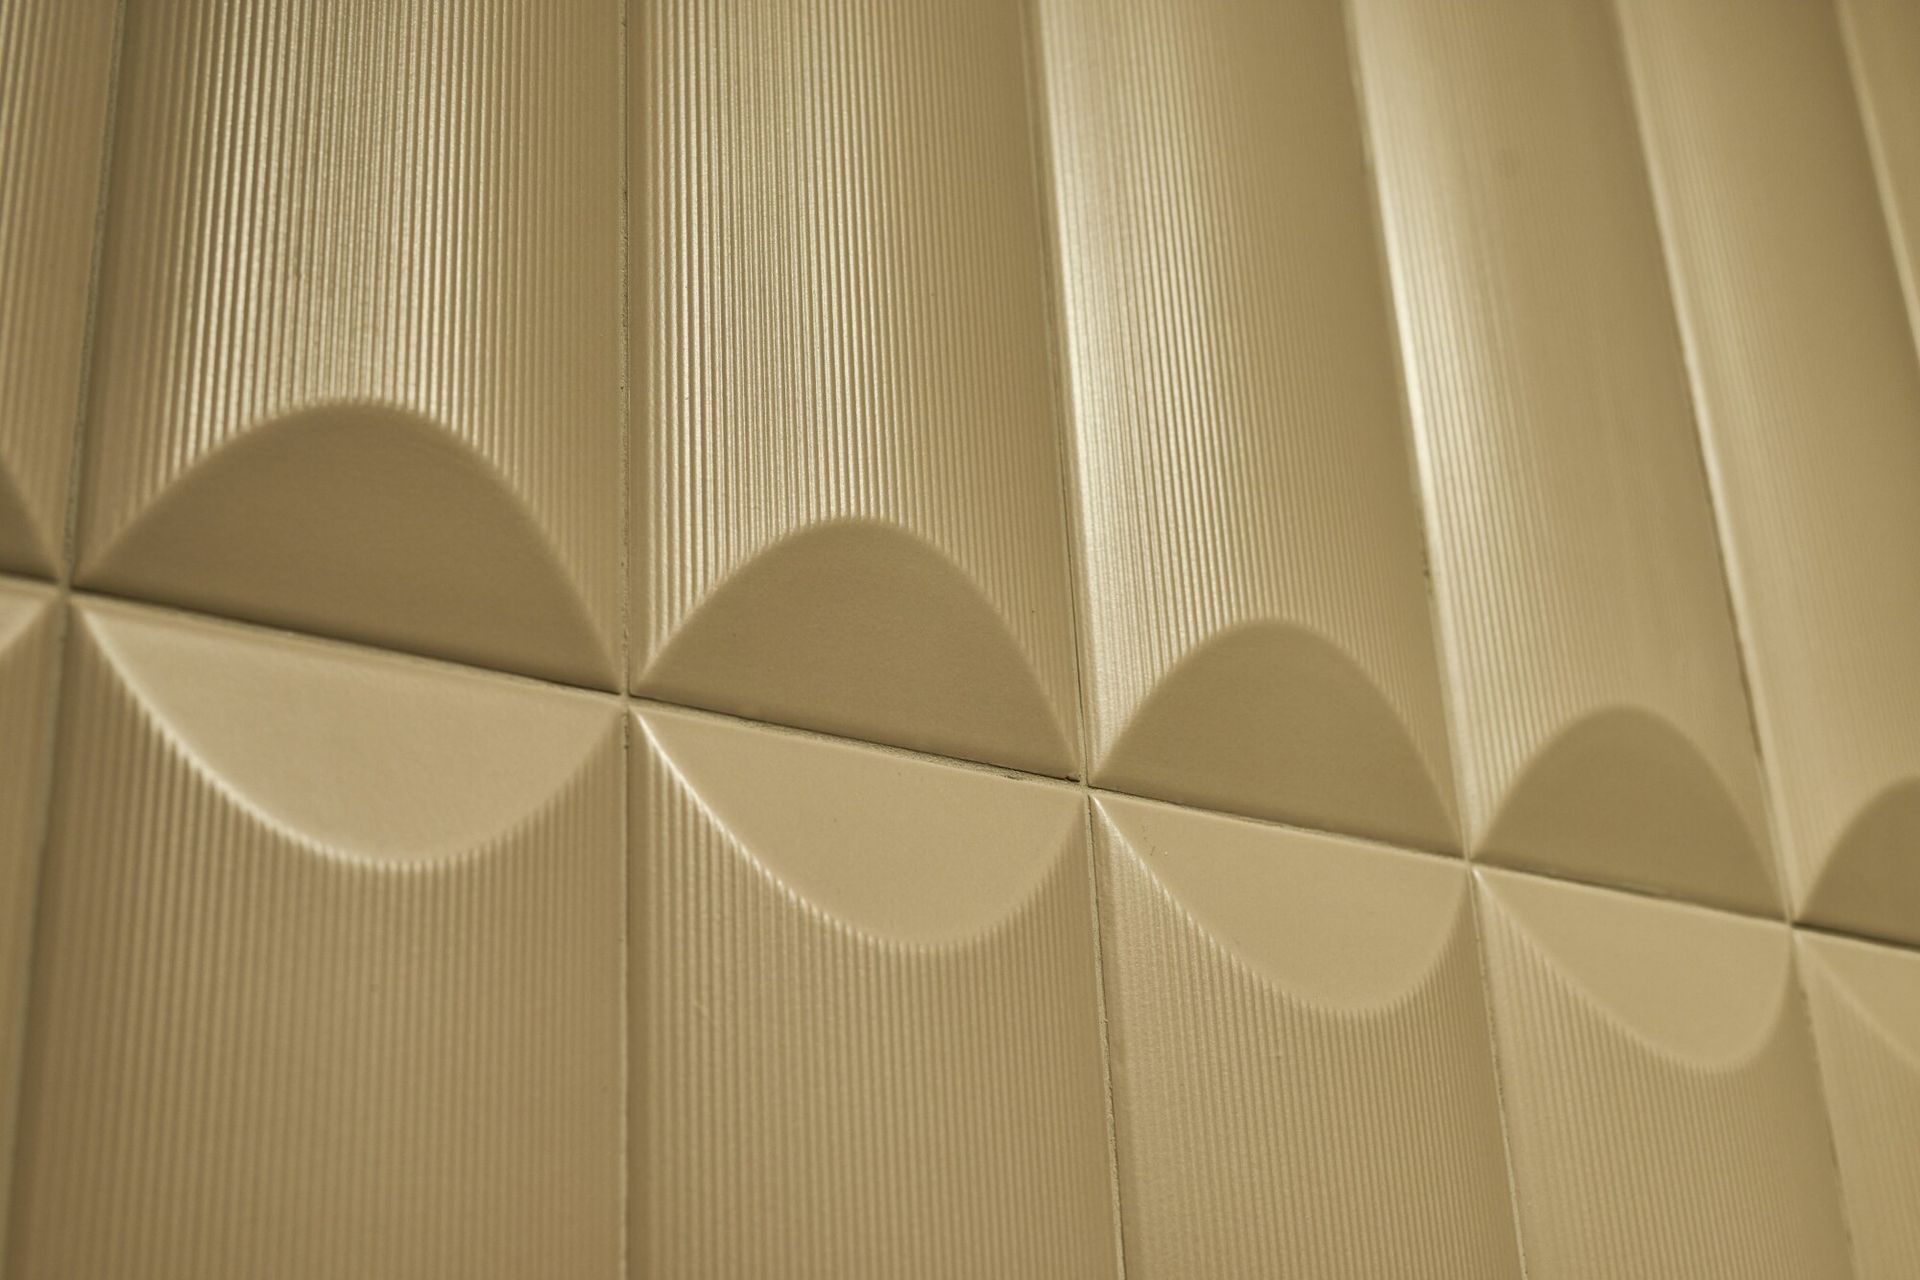 a close up of the yellow fluted tiles with a ribbed texture .